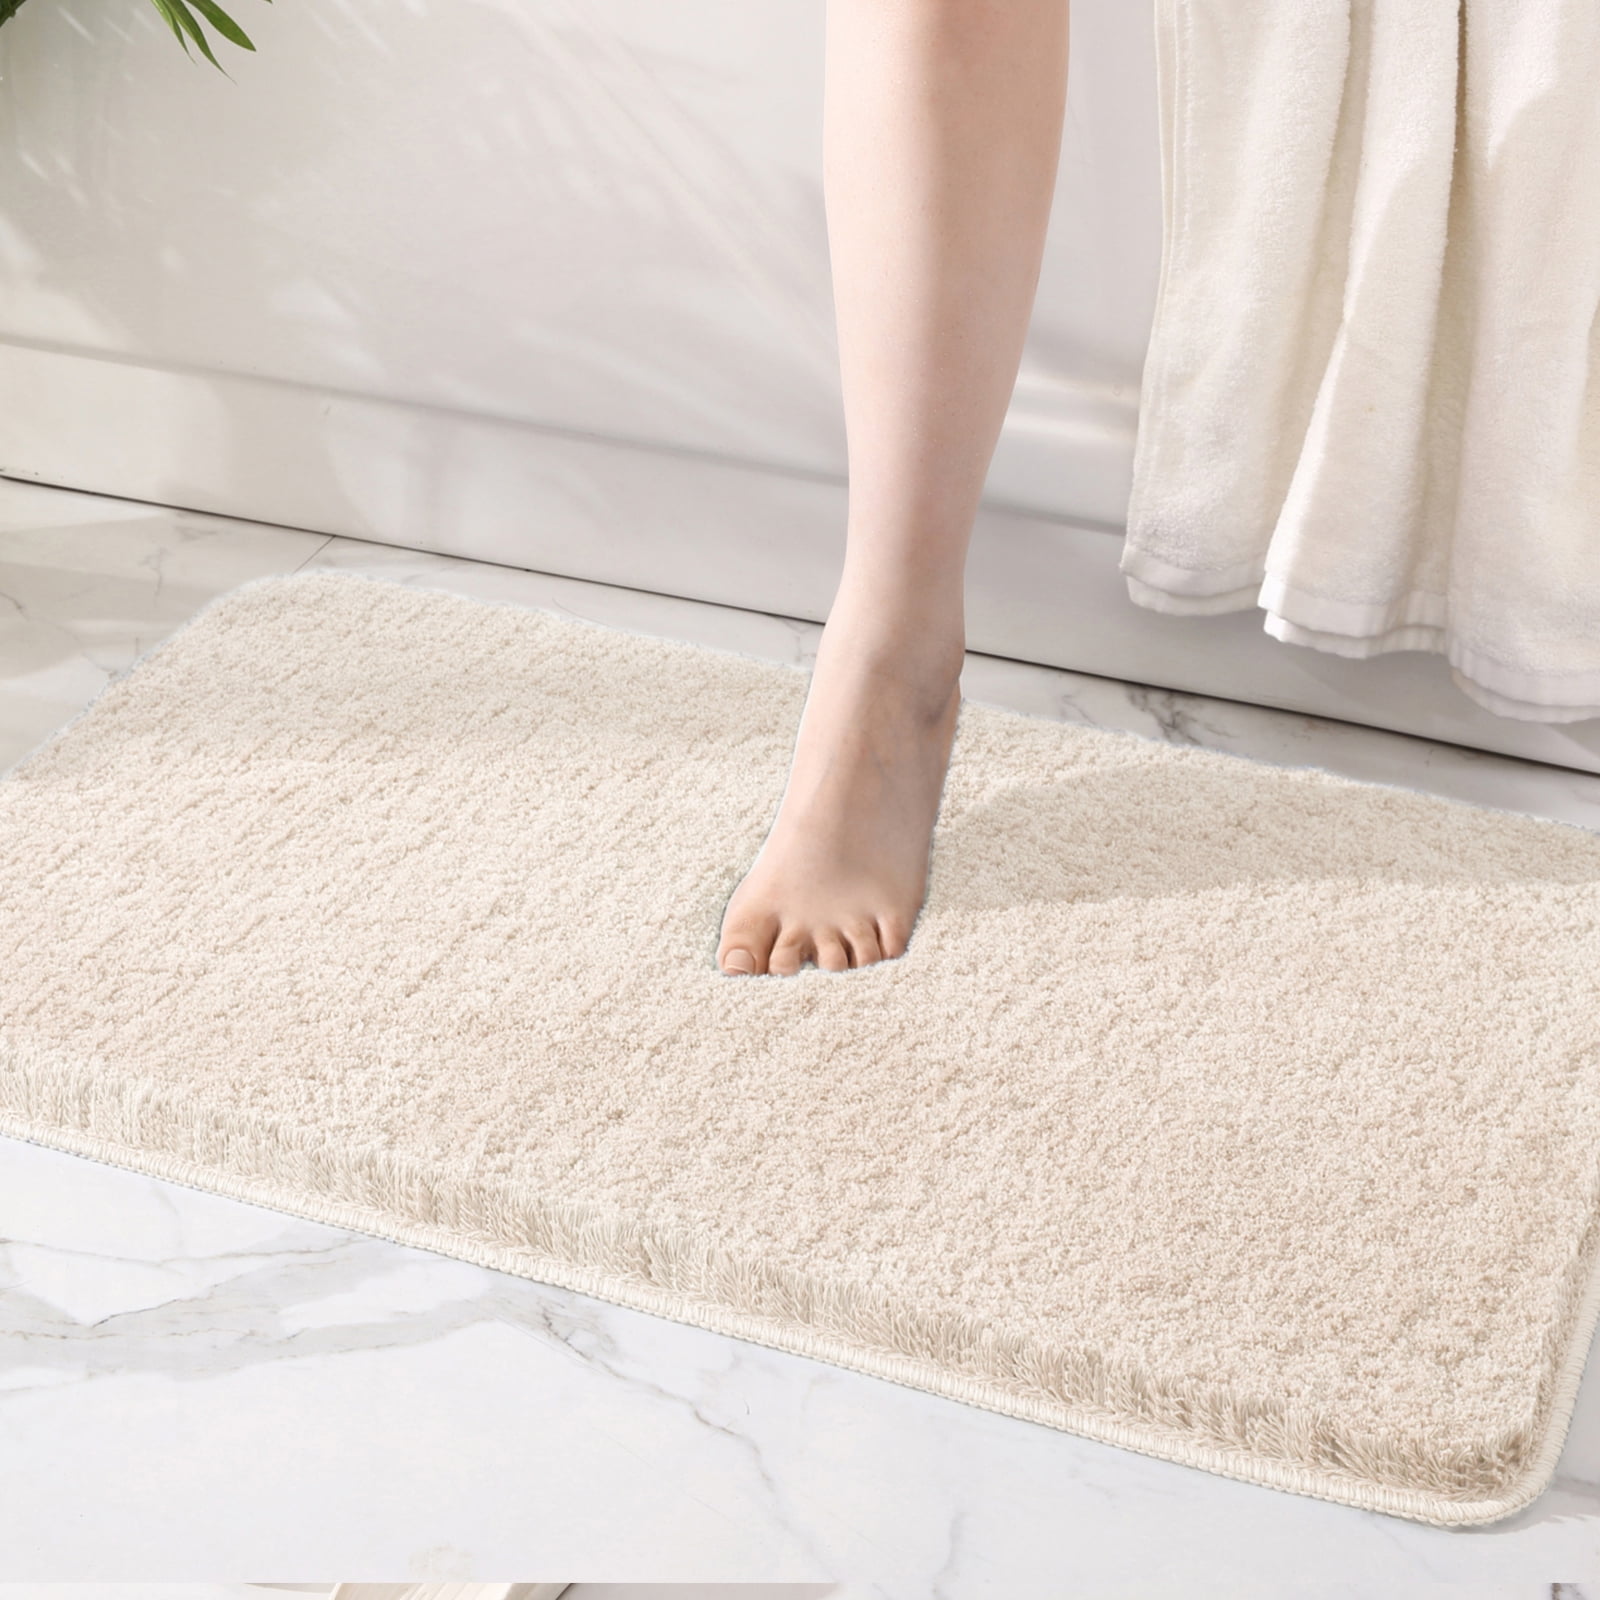 TUTUnaumb 2022 Winter Bathroom Rug,Soft And Comfortable,Puffy And Durable  Thick Bath Mat,Machine Washable Bathroom Mats,Non-Slip For Shower And Under